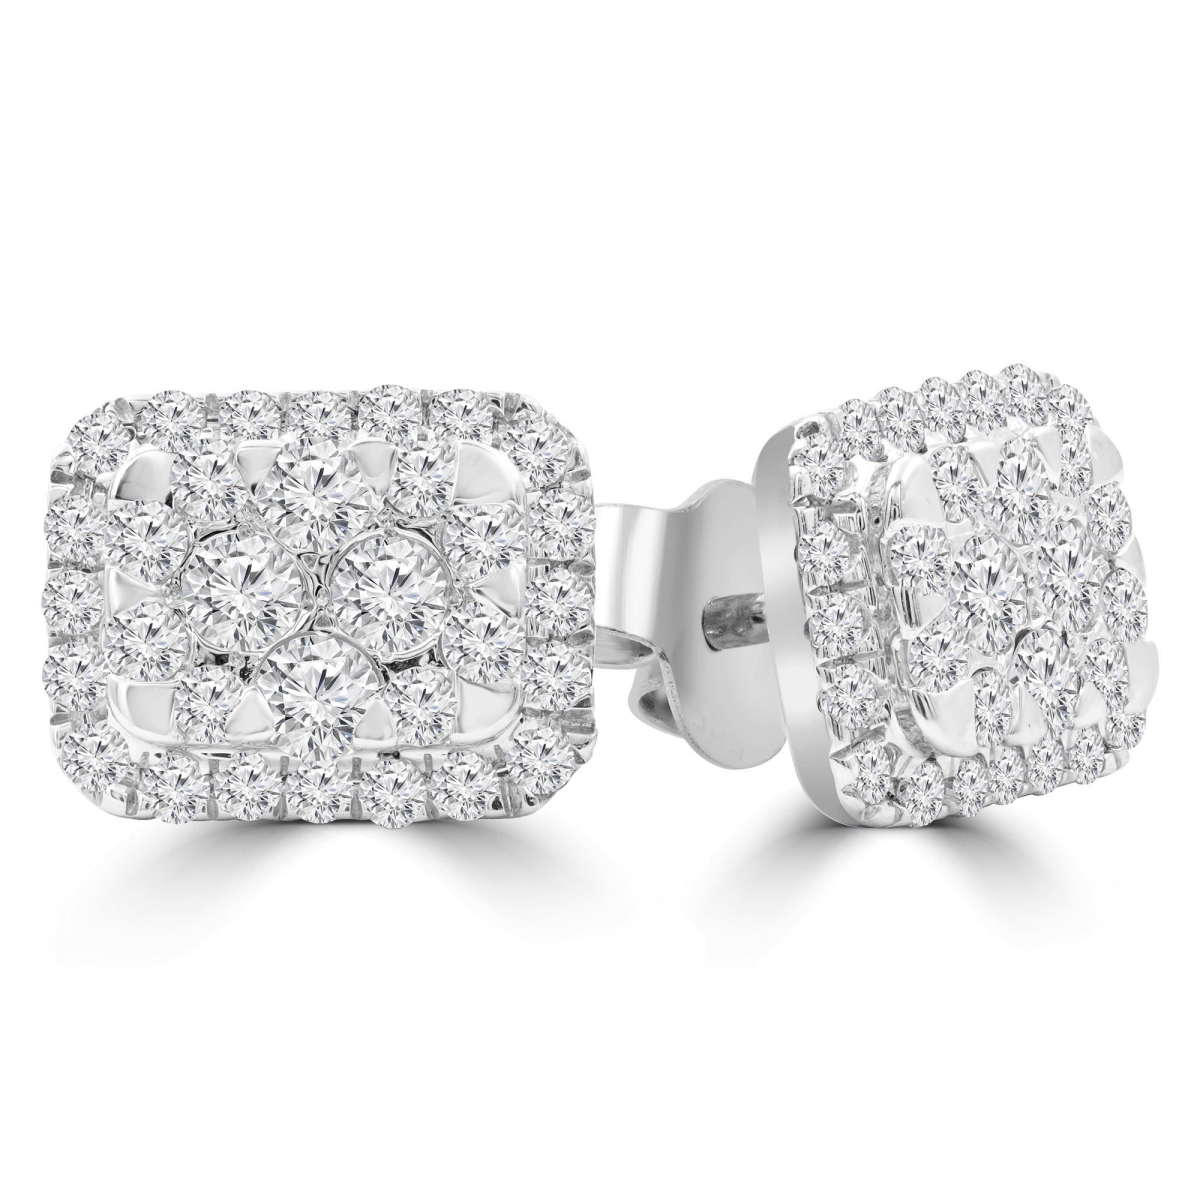 MDR210073 0.8 CTW Round Diamond Cluster Halo Stud Earrings in 14K White Gold -  Majesty Diamonds